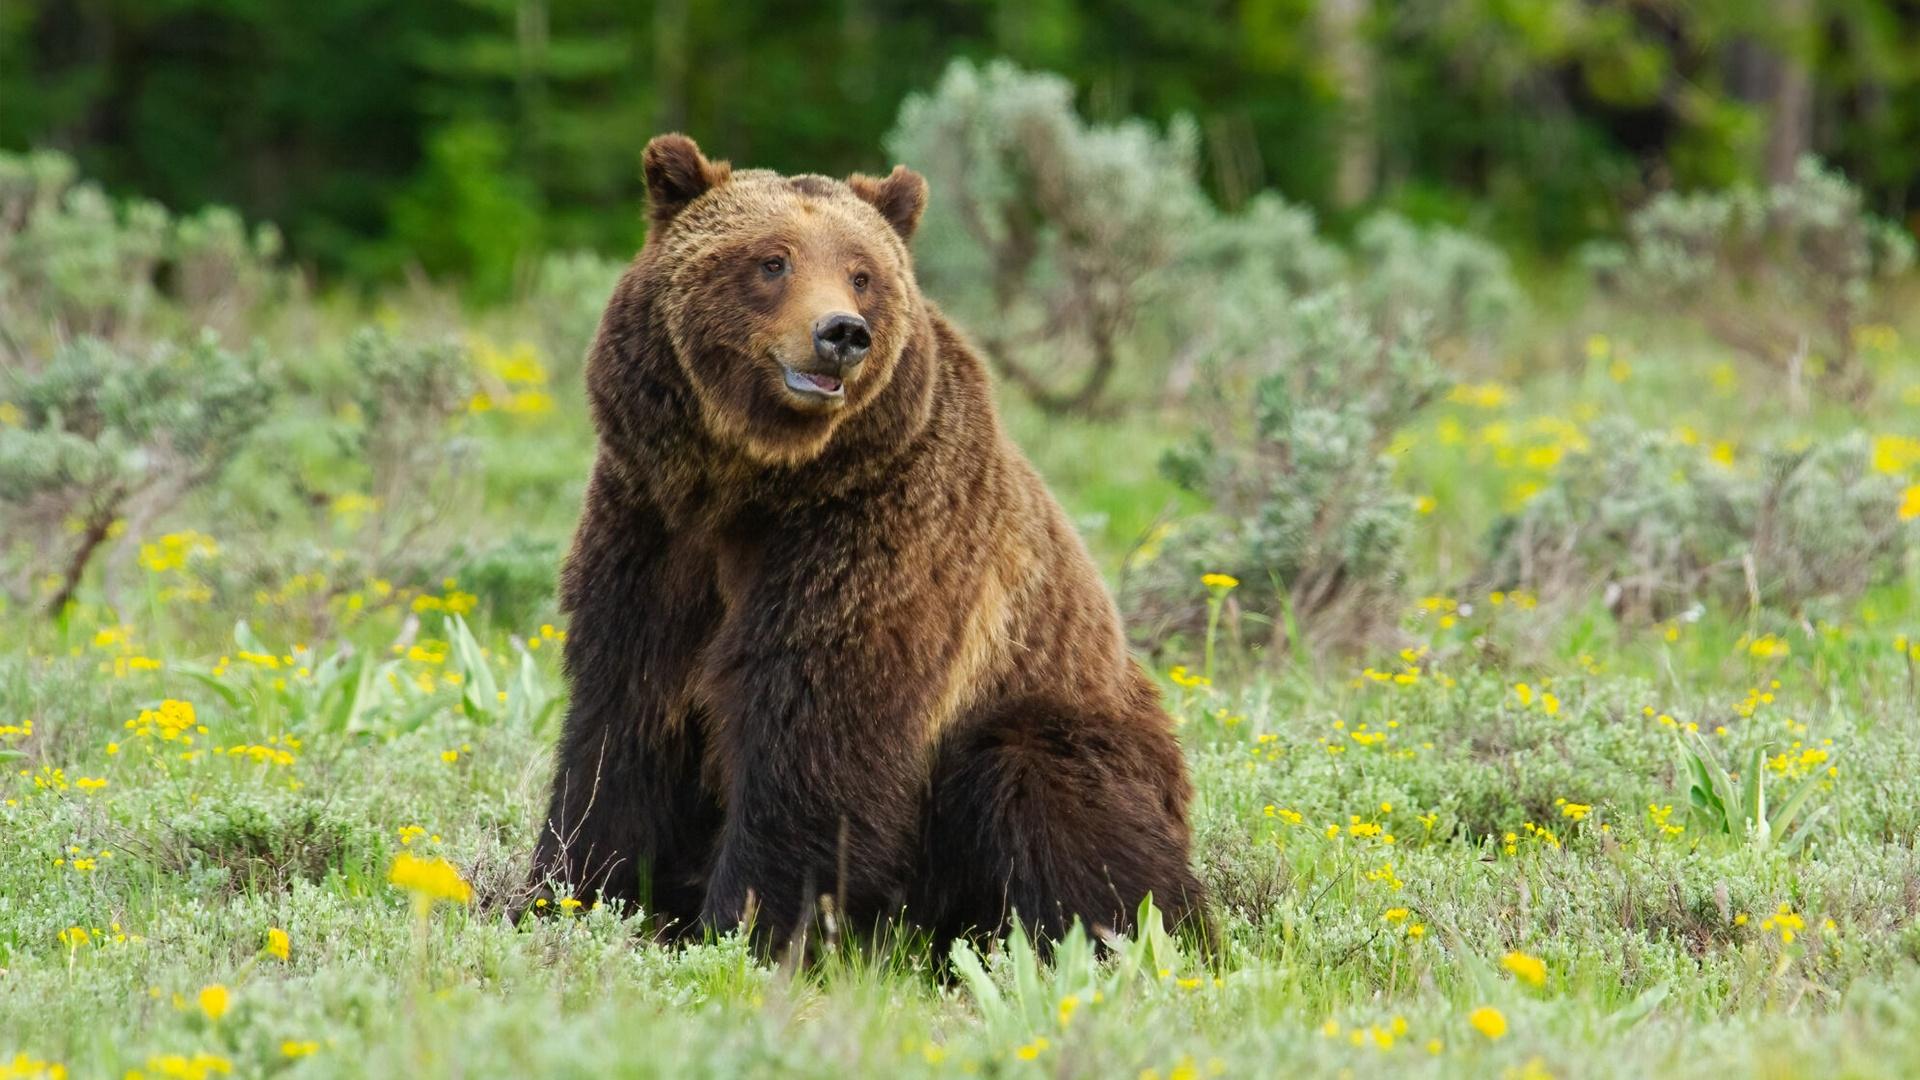 A grizzly bear sitting in a field.